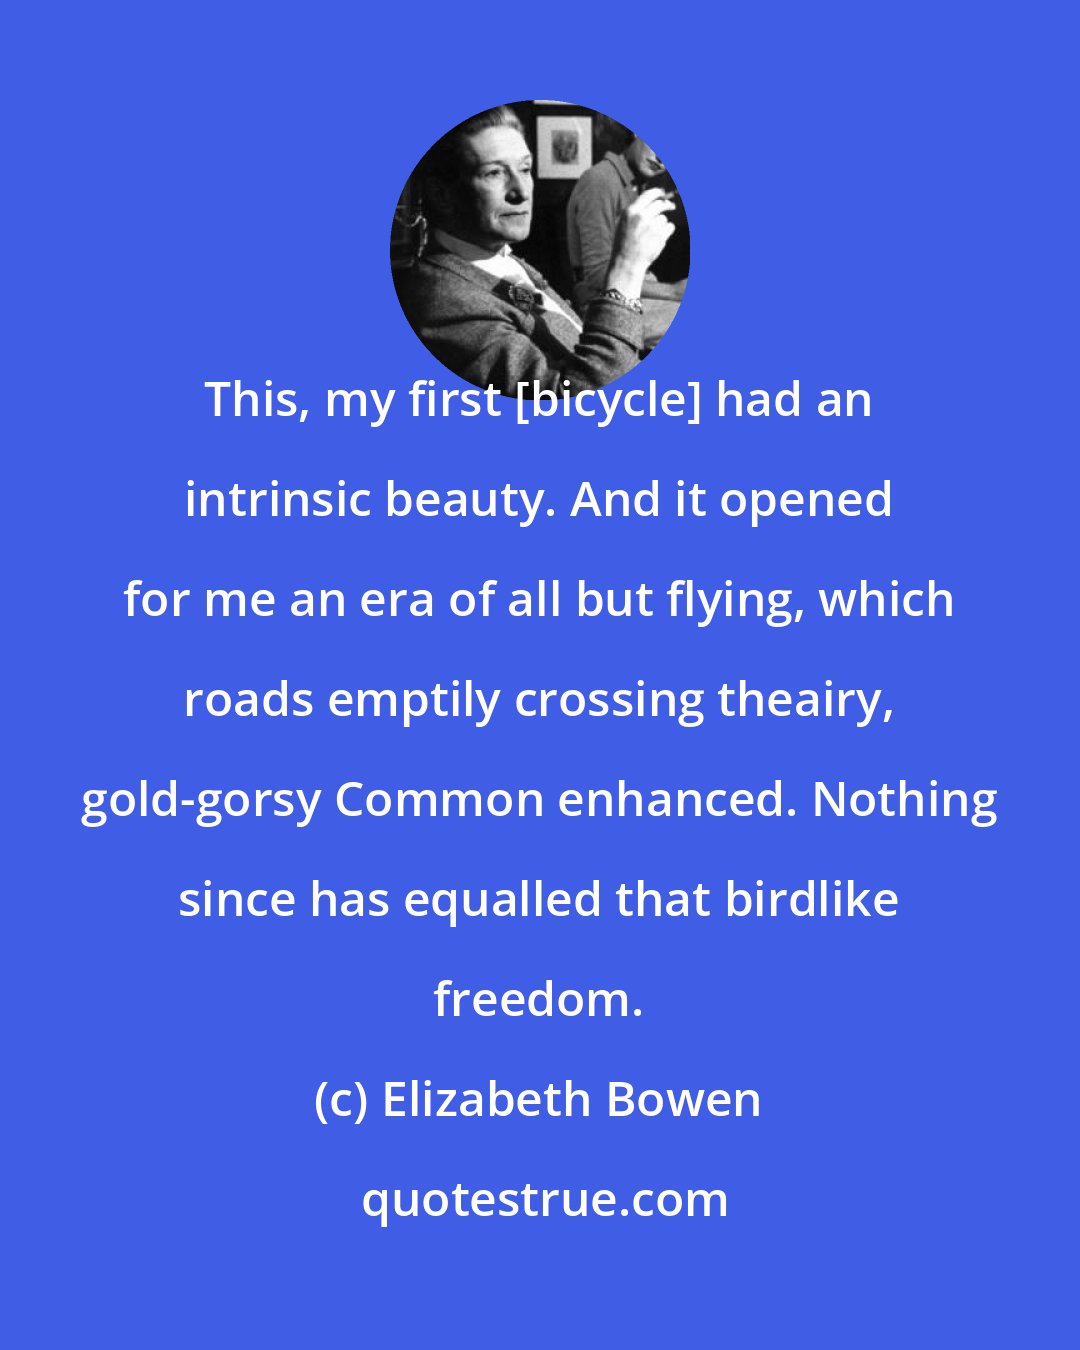 Elizabeth Bowen: This, my first [bicycle] had an intrinsic beauty. And it opened for me an era of all but flying, which roads emptily crossing theairy, gold-gorsy Common enhanced. Nothing since has equalled that birdlike freedom.